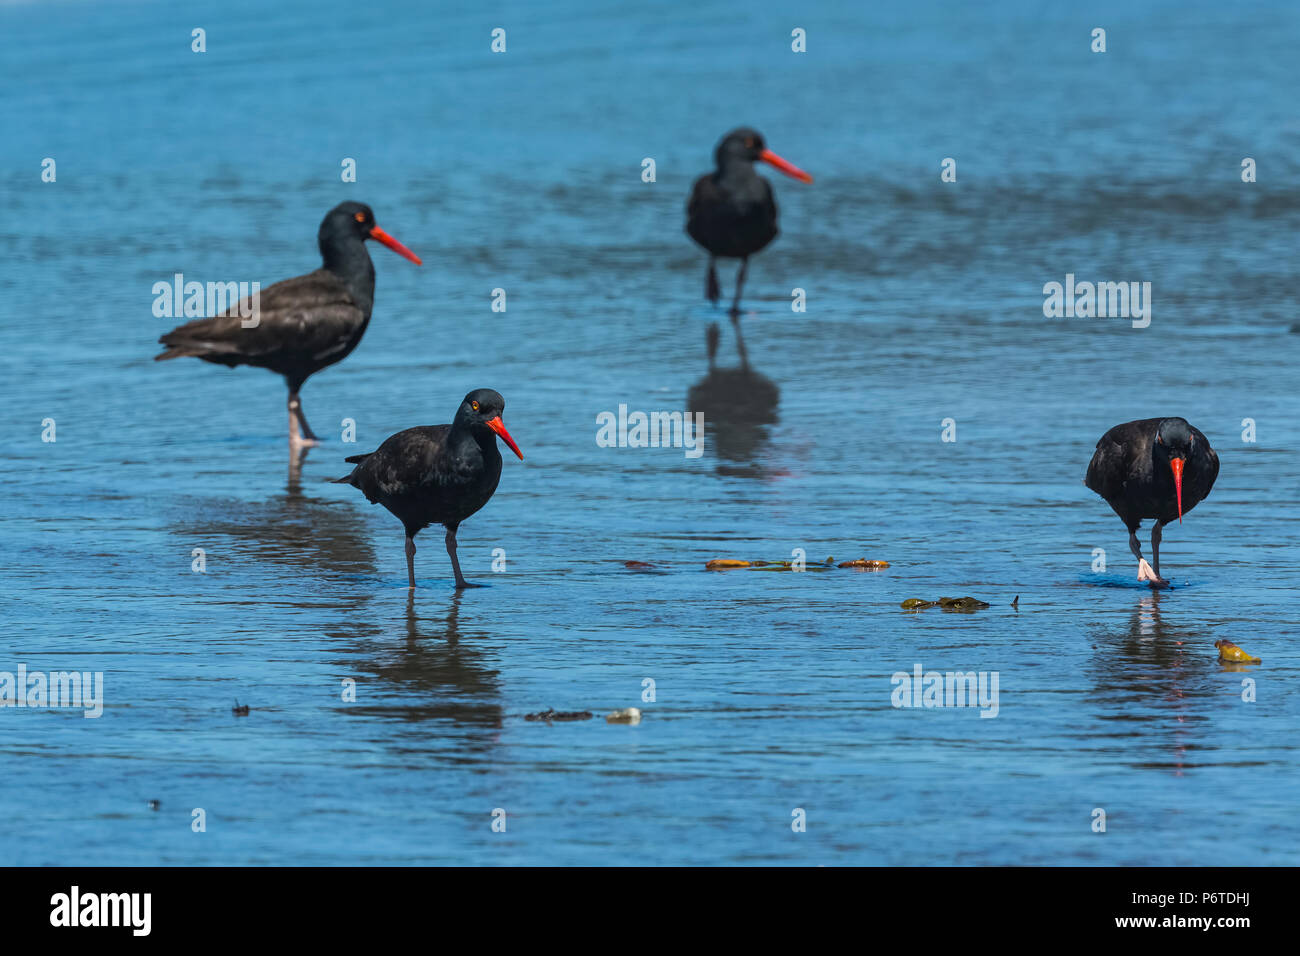 Black Oystercatcher, Haematopus bachmani, gathering at Willoughby Creek, a source of freshwater on Shi Shi Beach along the Pacific Ocean in Olympic Na Stock Photo